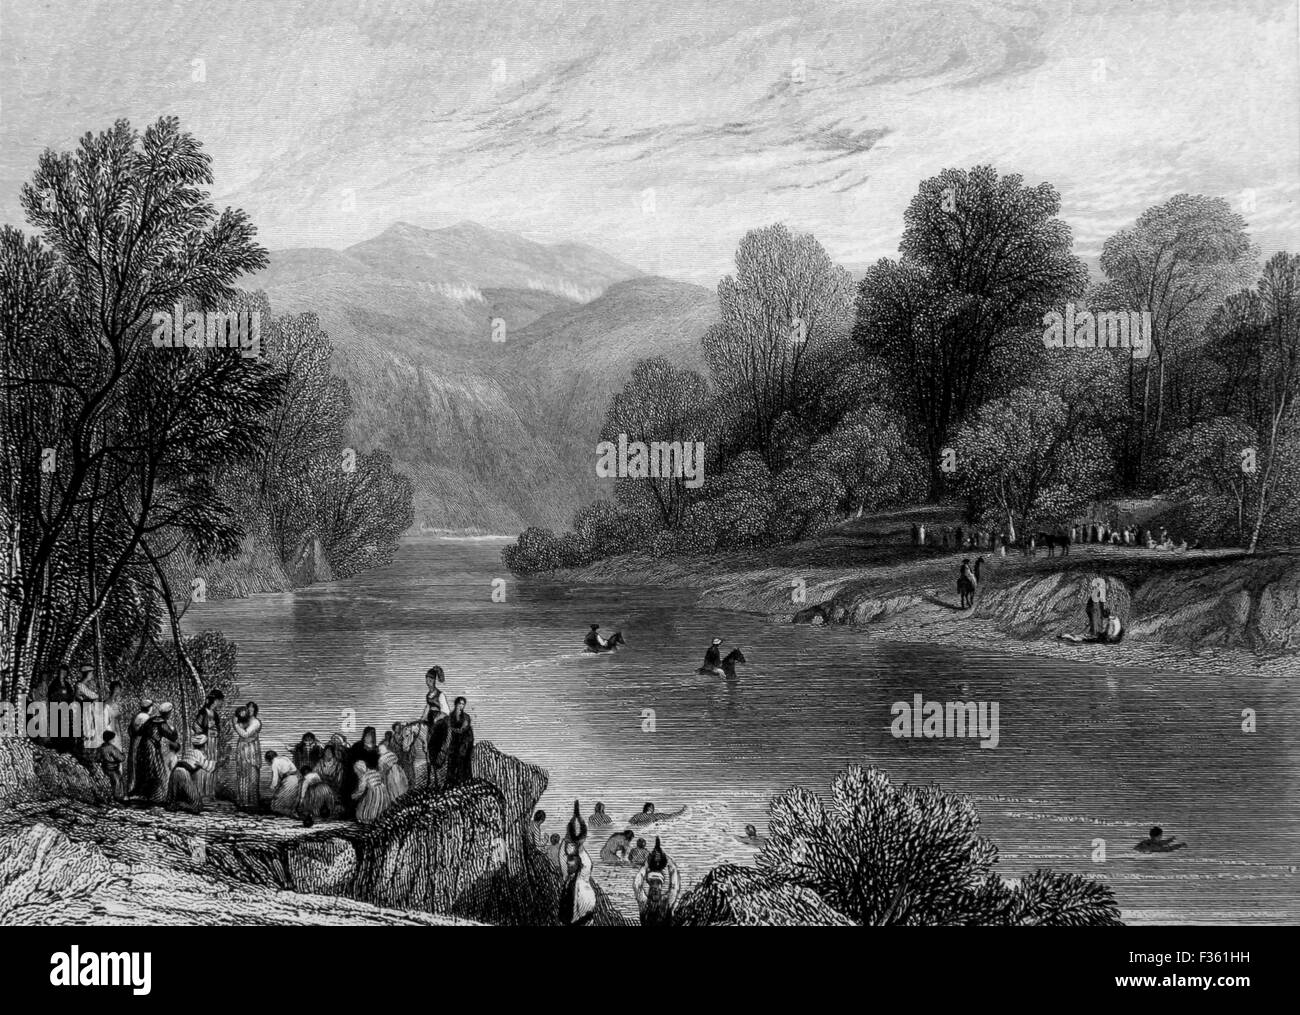 The Fords of the River Jordan; Black and White Illustration from Landscapes of the Bible Stock Photo